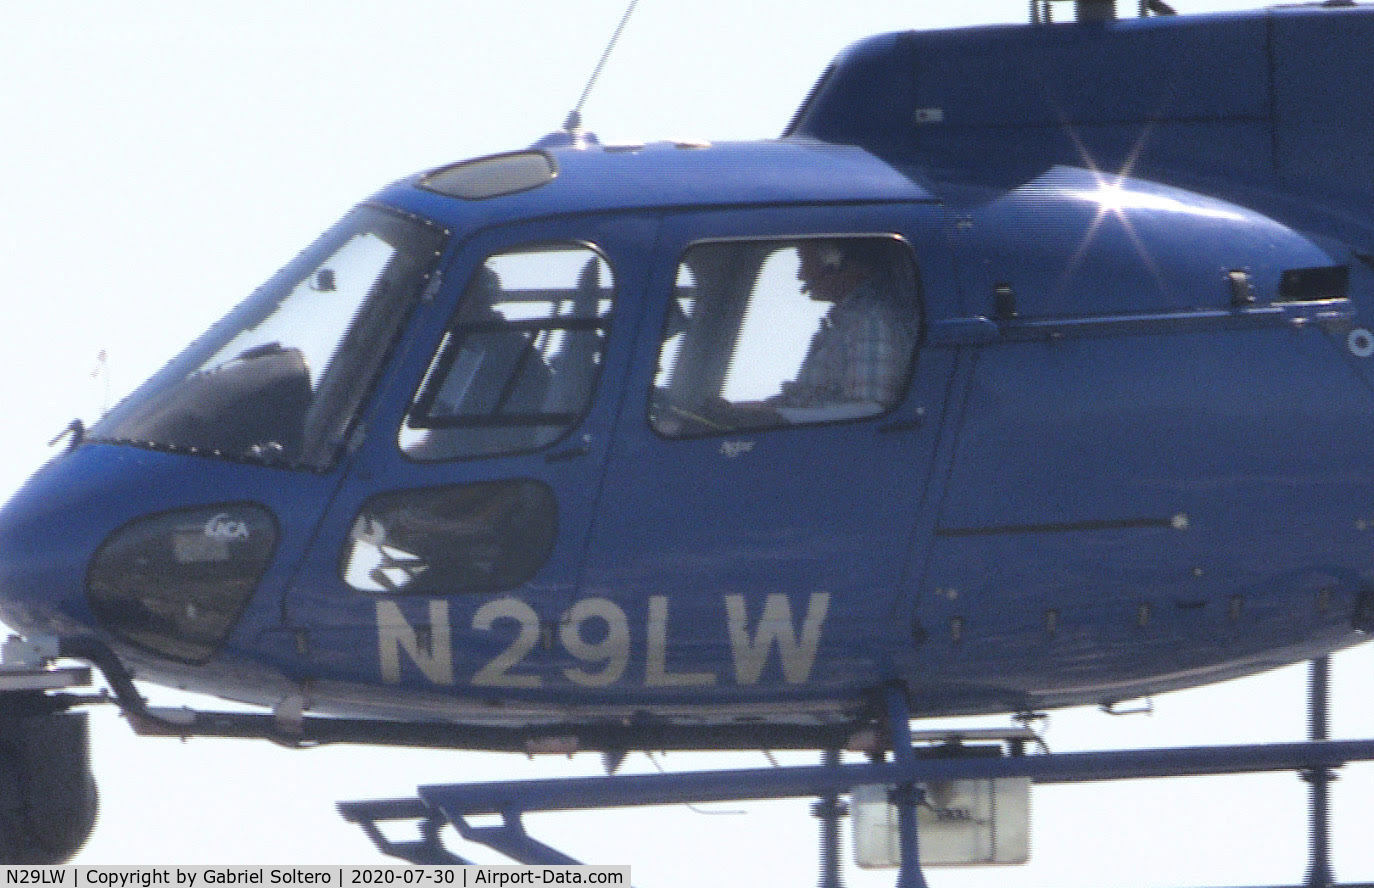 N29LW, 2008 Eurocopter AS-350B-2 Ecureuil Ecureuil C/N 4485, ENG helicopter operated by Welk Aviation for KNBC-TV. AKA News Chopper 4 Bravo based in Fullerton. This photo was taken over a structure fire in Pasadena from N925TV.